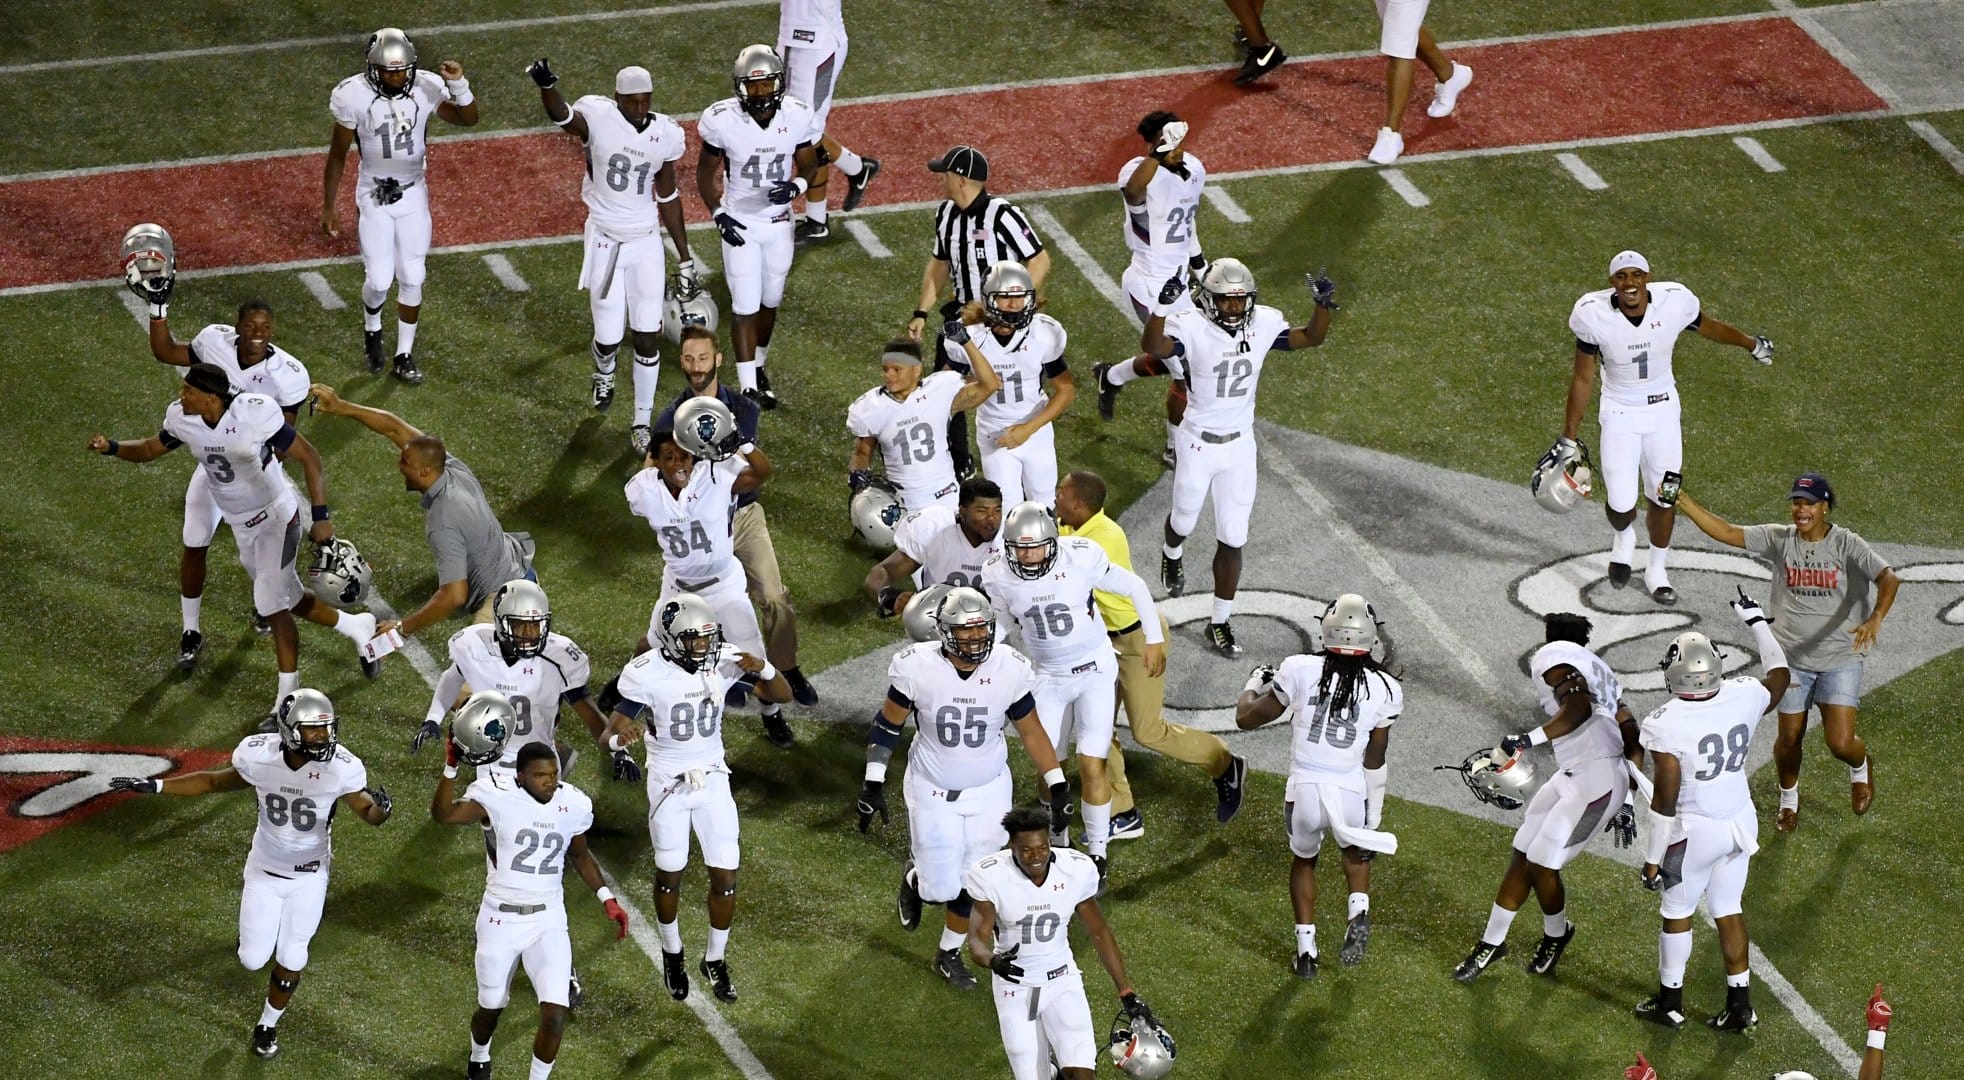 Members of the Howard Bison celebrate as time expires in their 43-40 win over the UNLV Rebels at Sam Boyd Stadium on September 2, 2017 in Las Vegas, Nevada. (Photo by Ethan Miller/Getty Images)